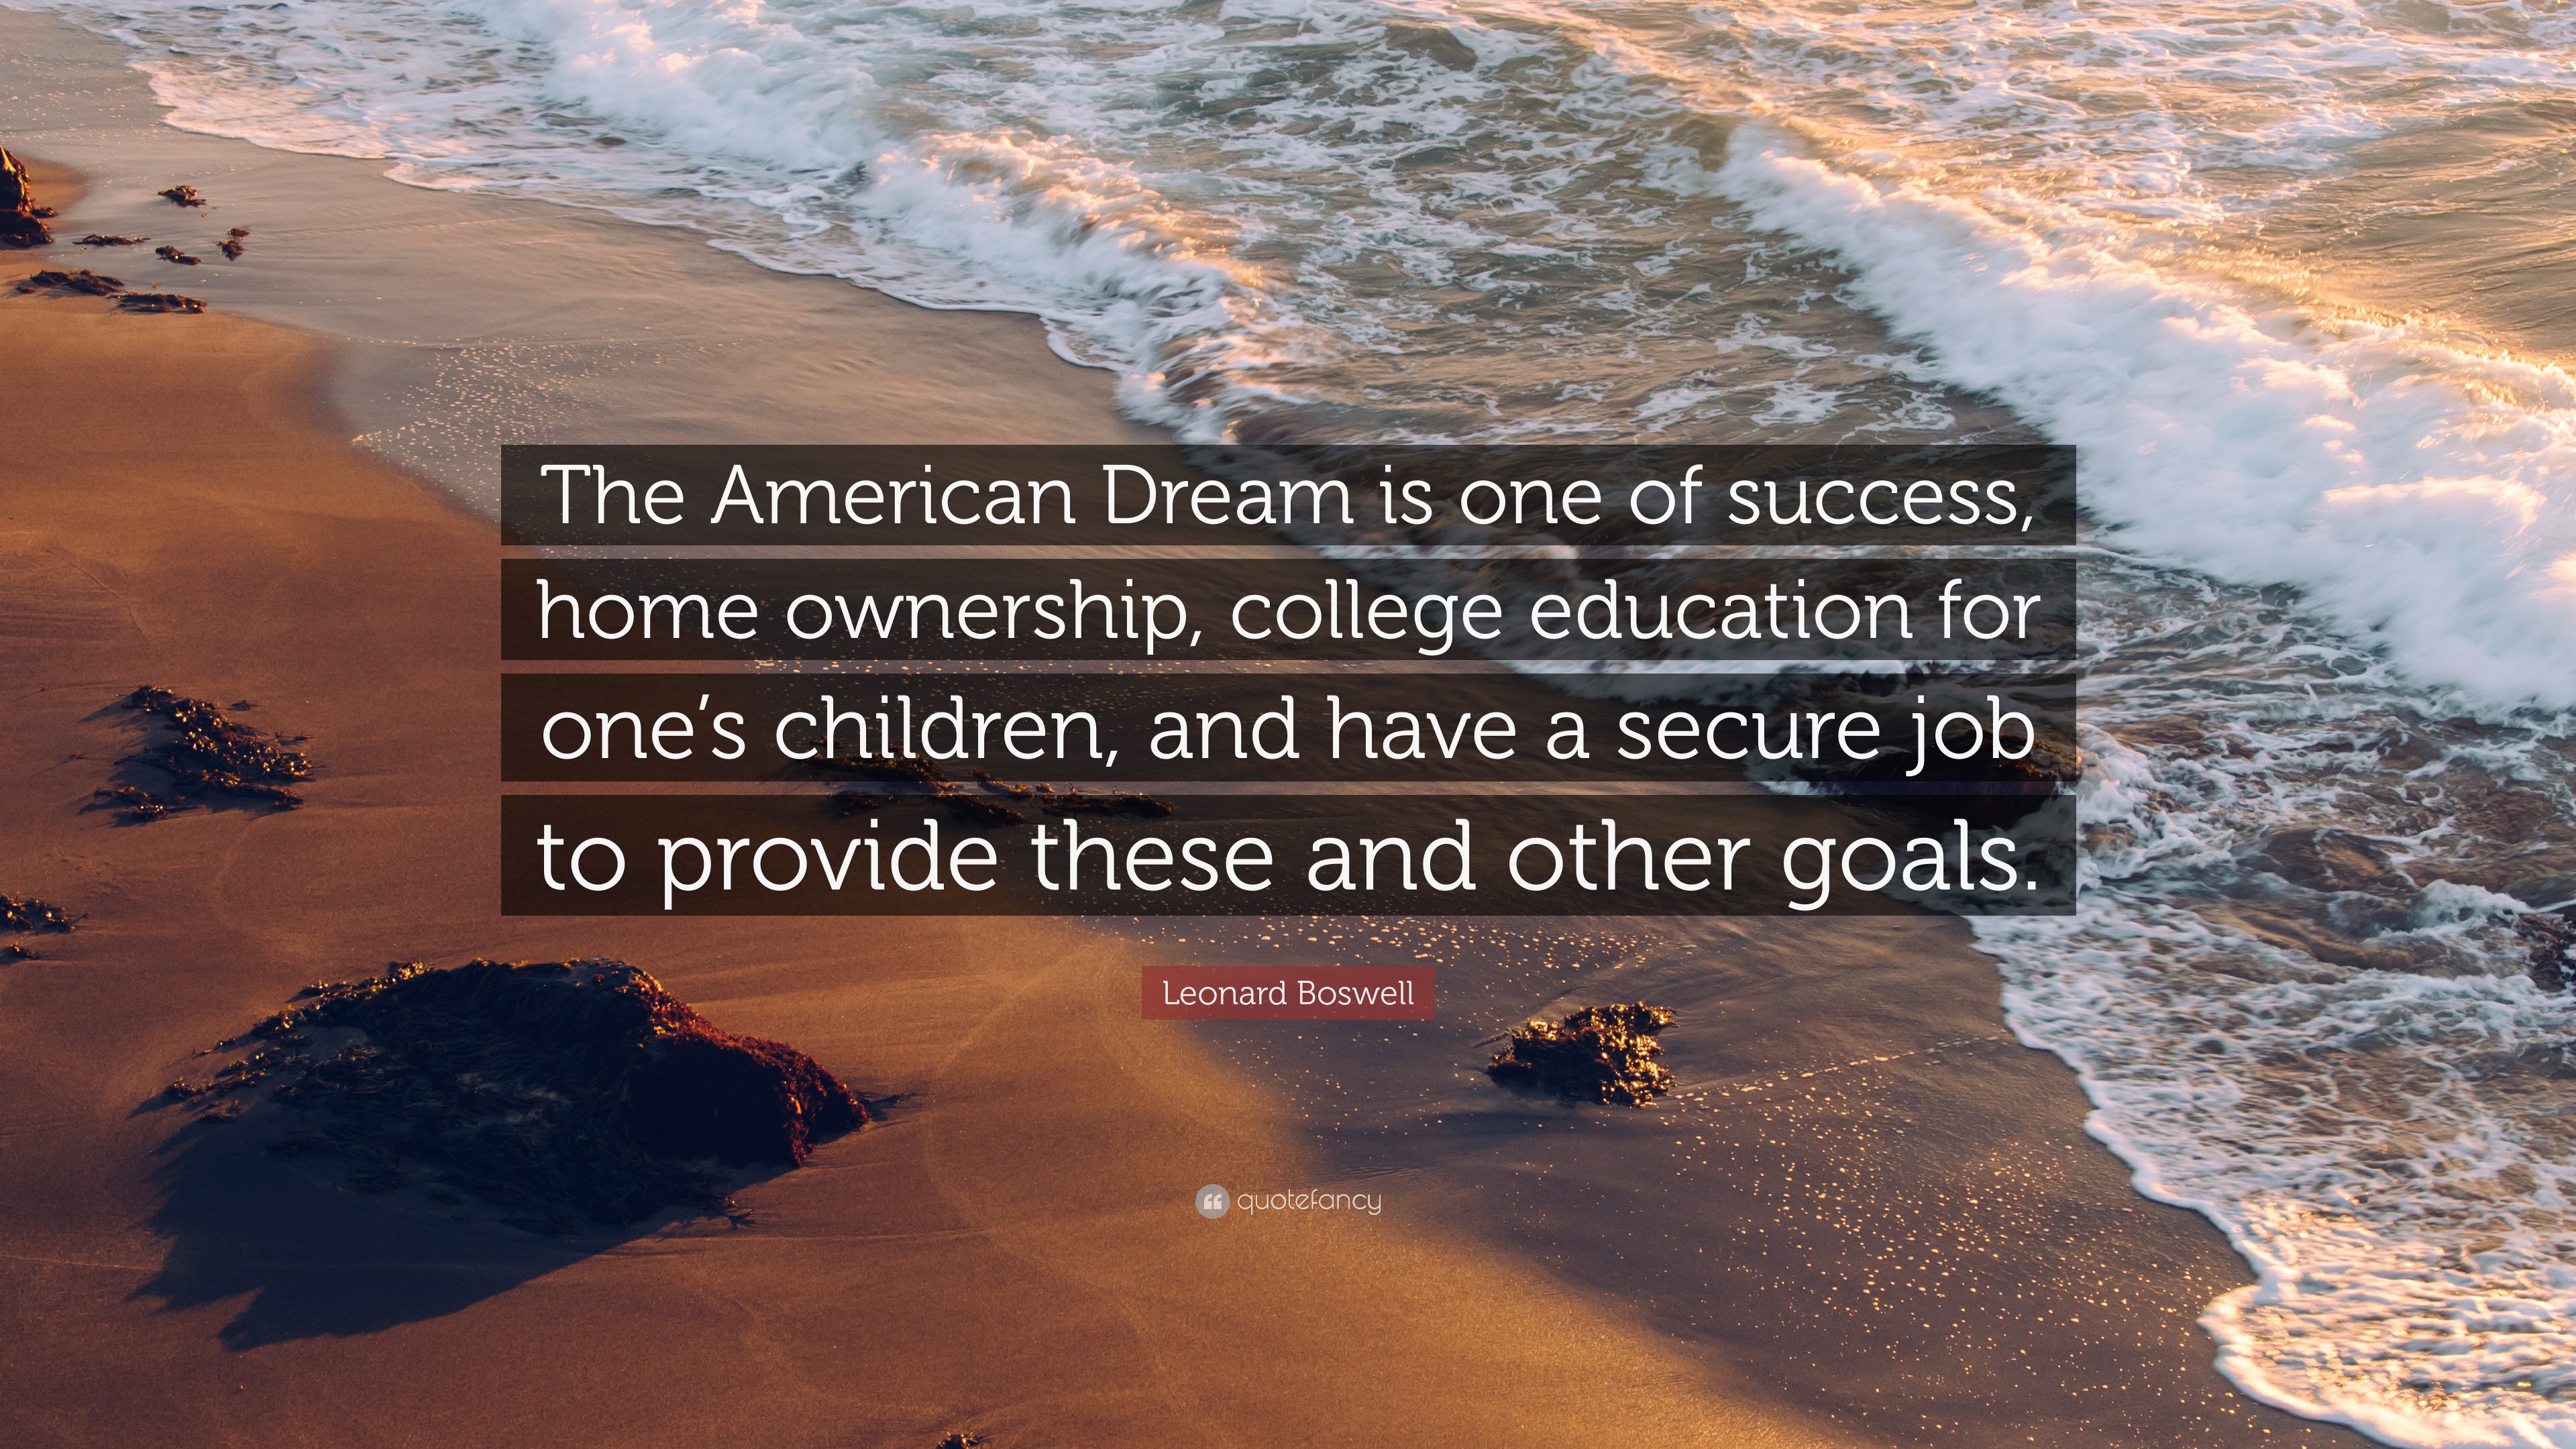 Leonard Boswell Quote: “The American Dream is one of success, home ...